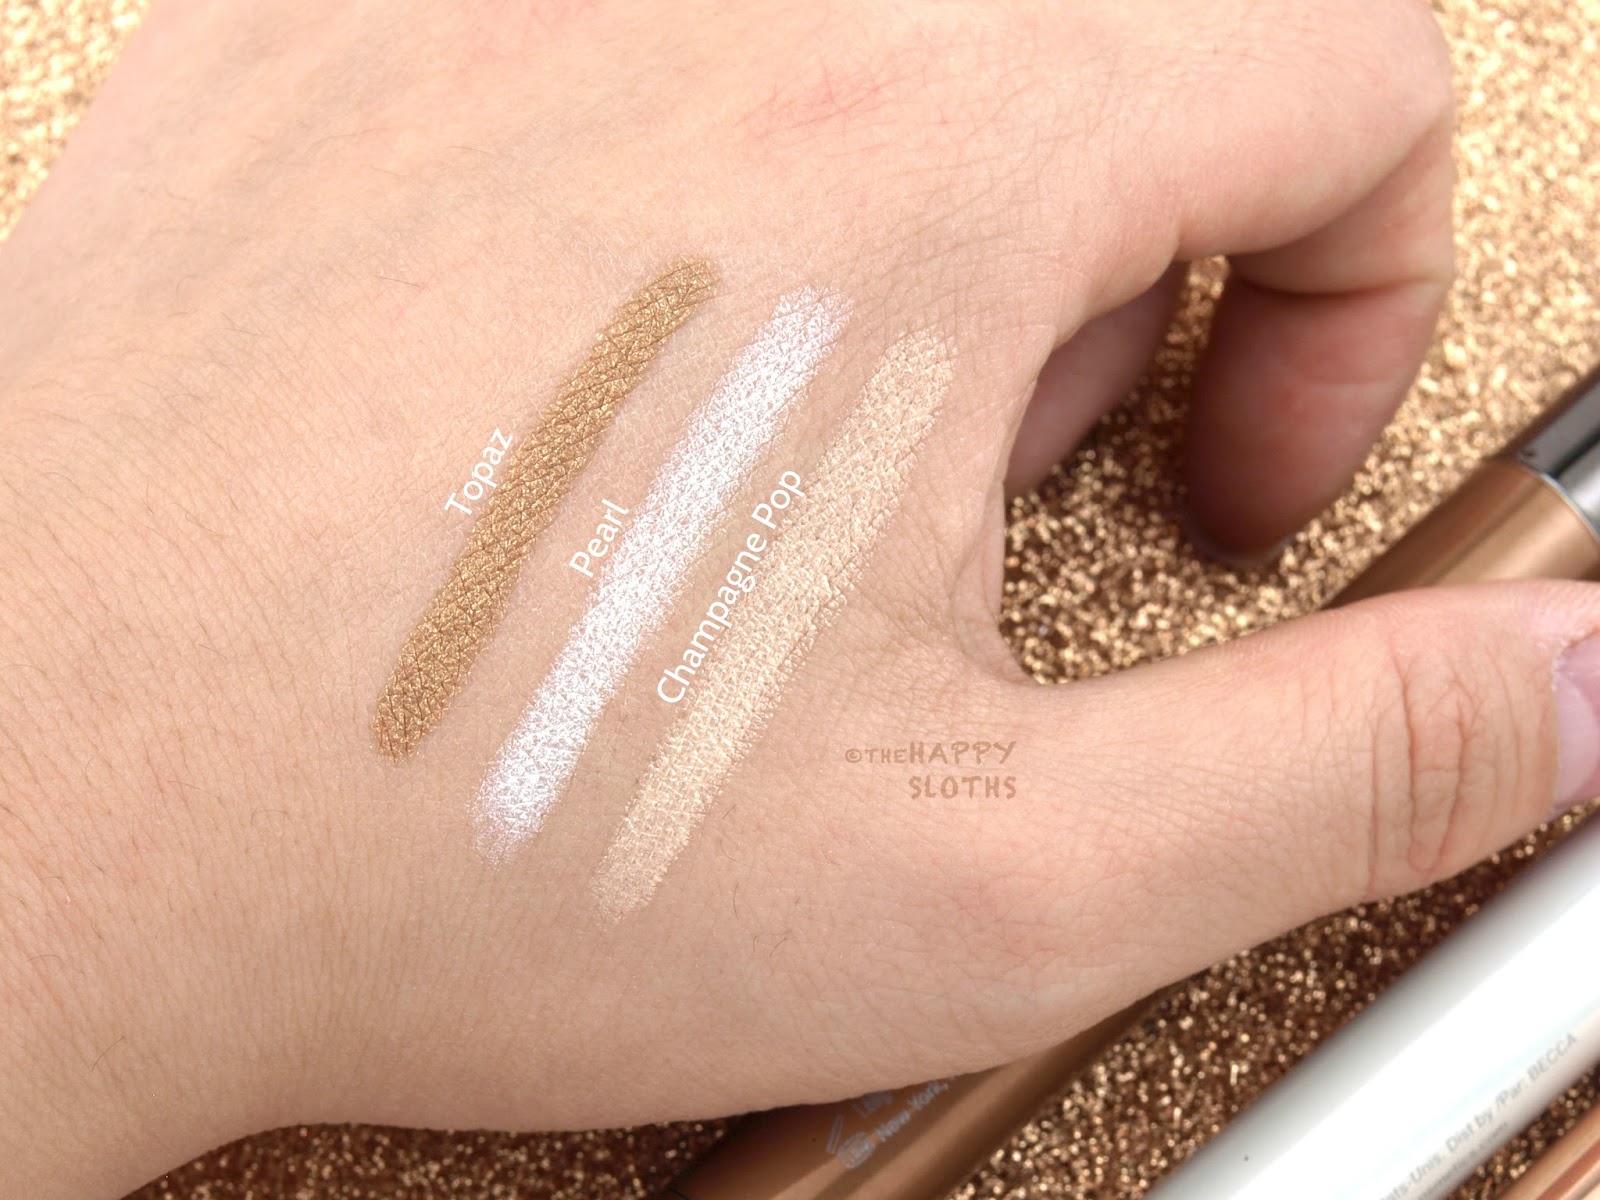 BECCA Shimmering Skin Perfector Slimlight: Review and Swatches | The Happy Sloths: Beauty, Makeup, and Skincare Blog Reviews and Swatches